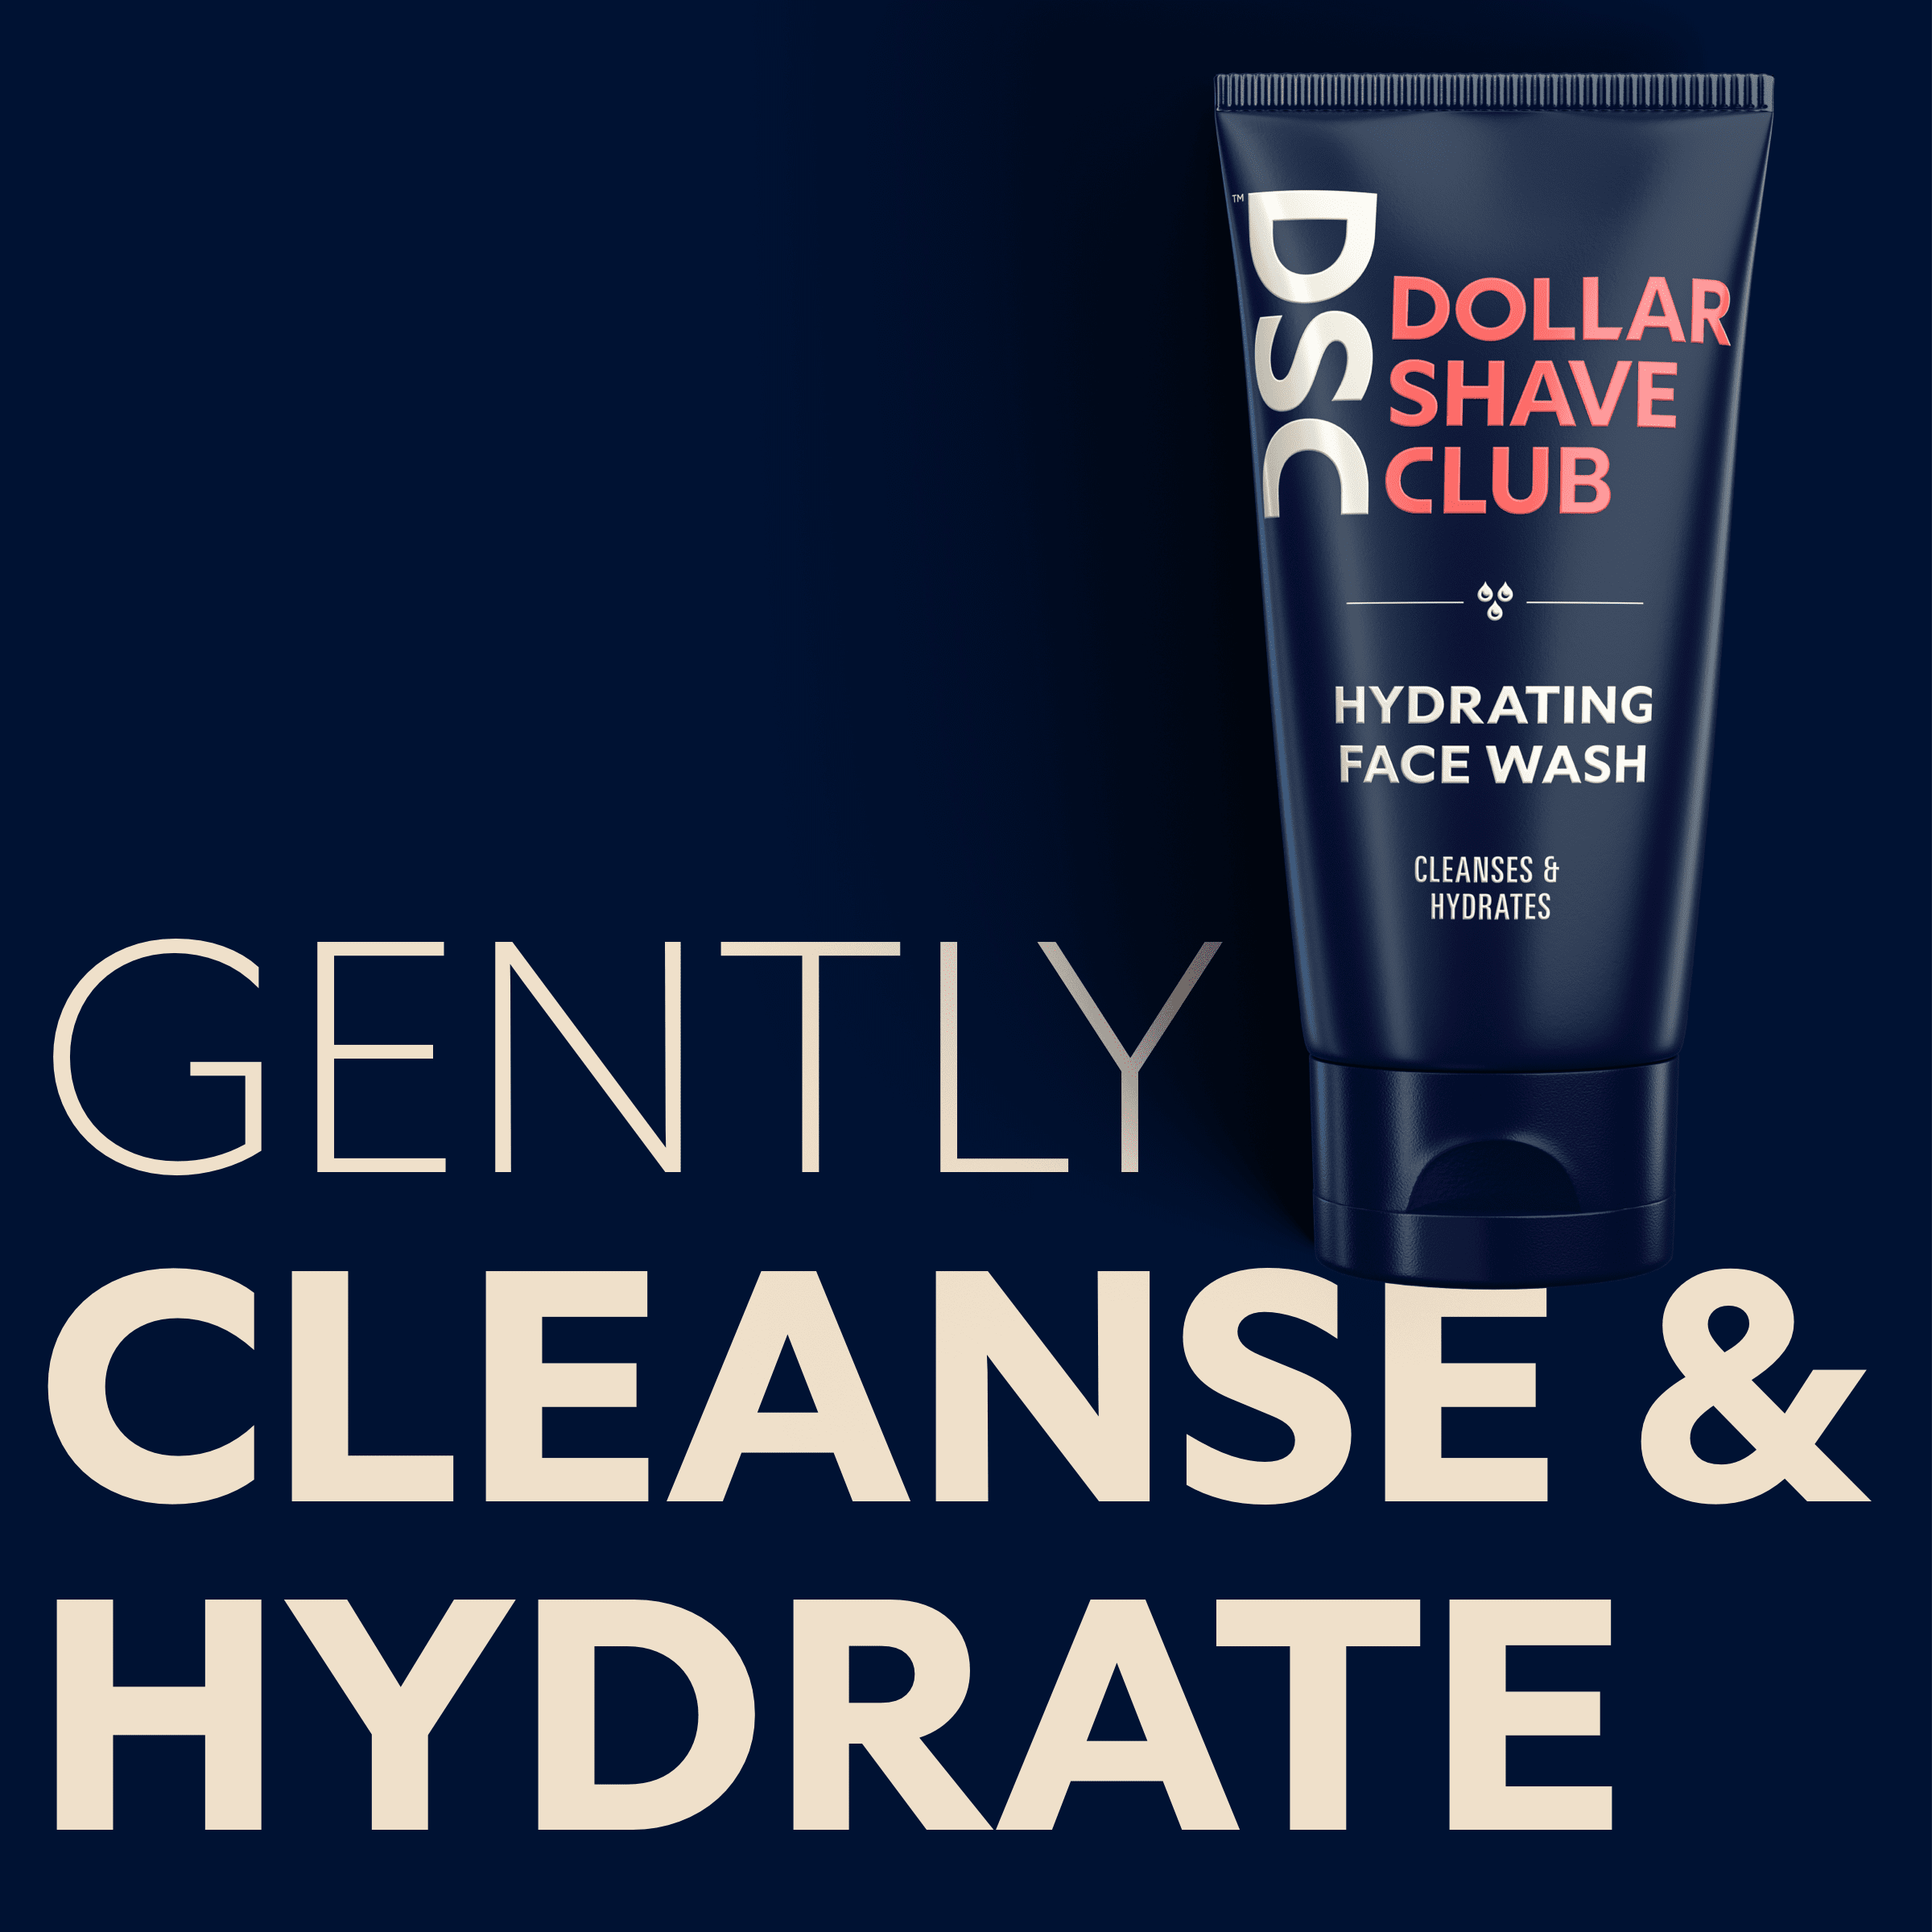 Dollar Shave Club Hydrating Face Wash gently cleanses and hydrates.